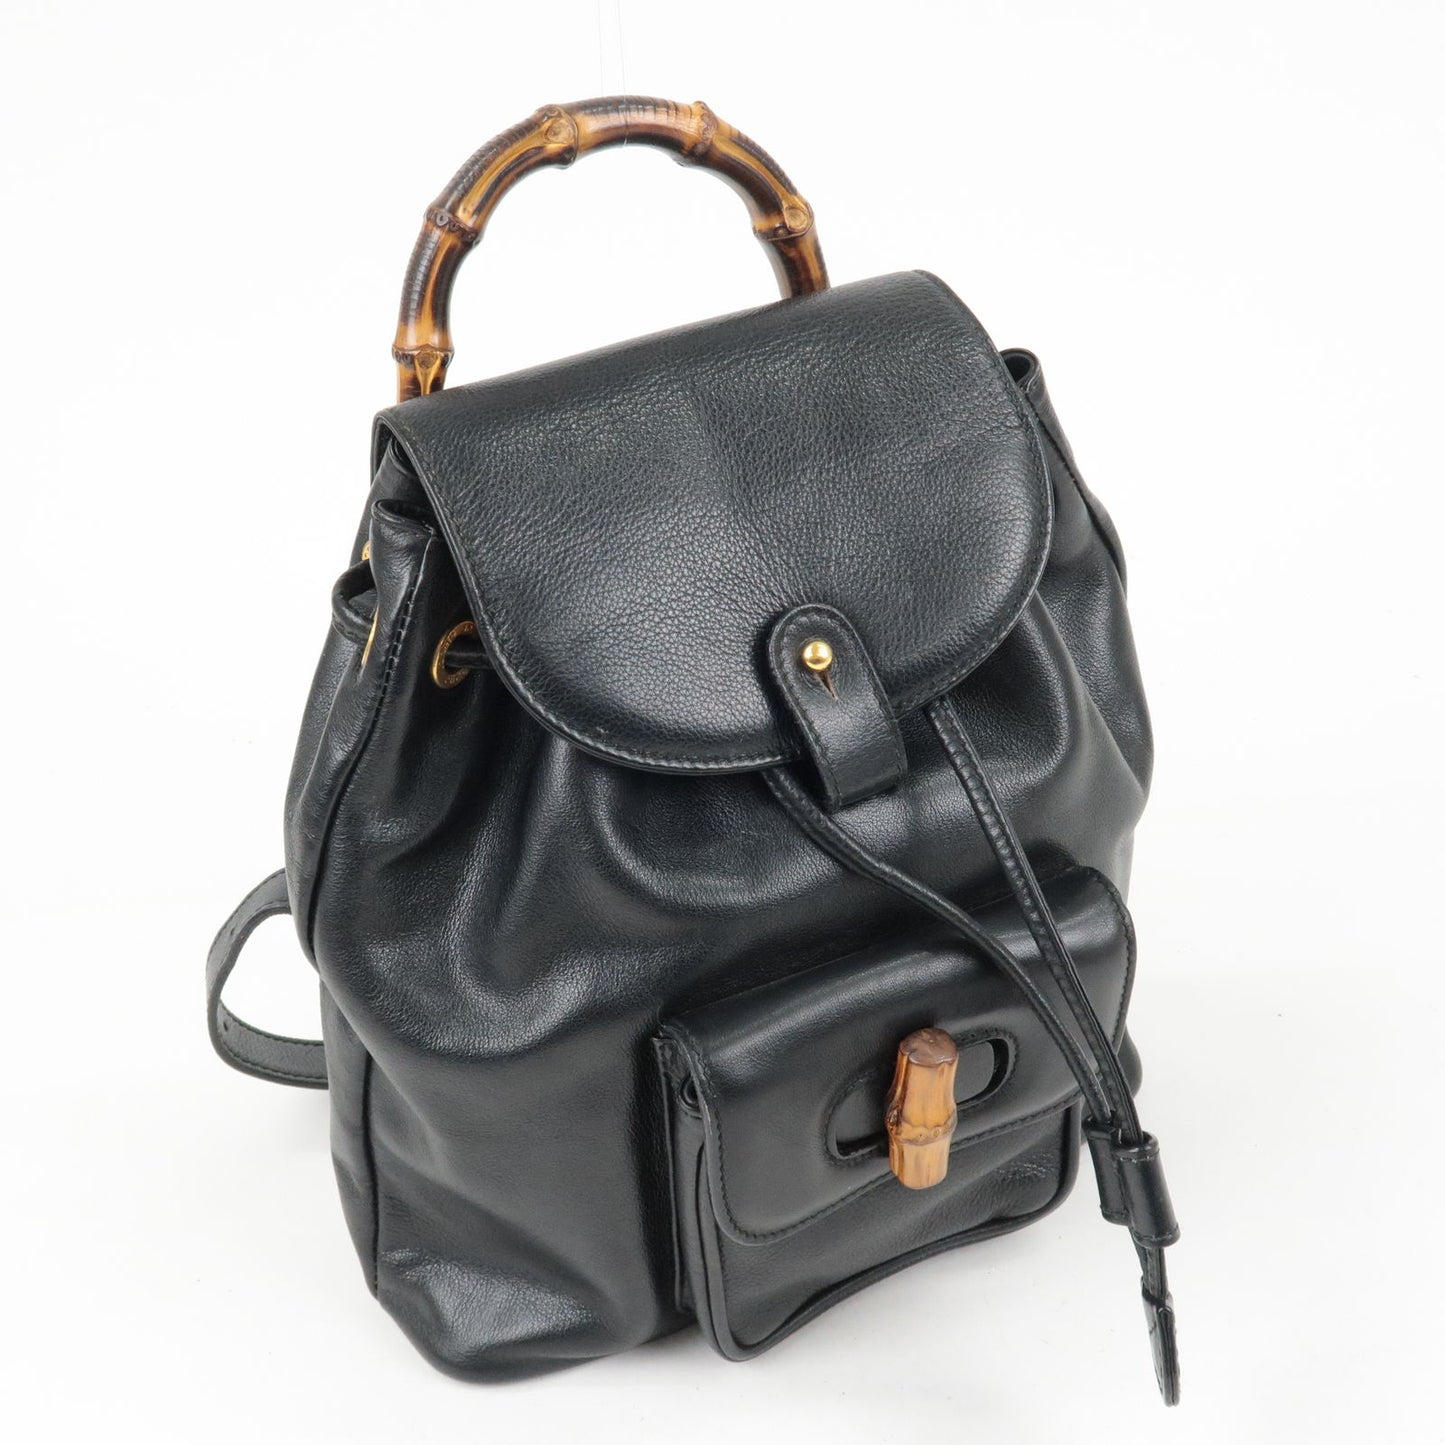 GUCCI Bamboo Leather Ruck Sack Back Pack Black 003.58.0030